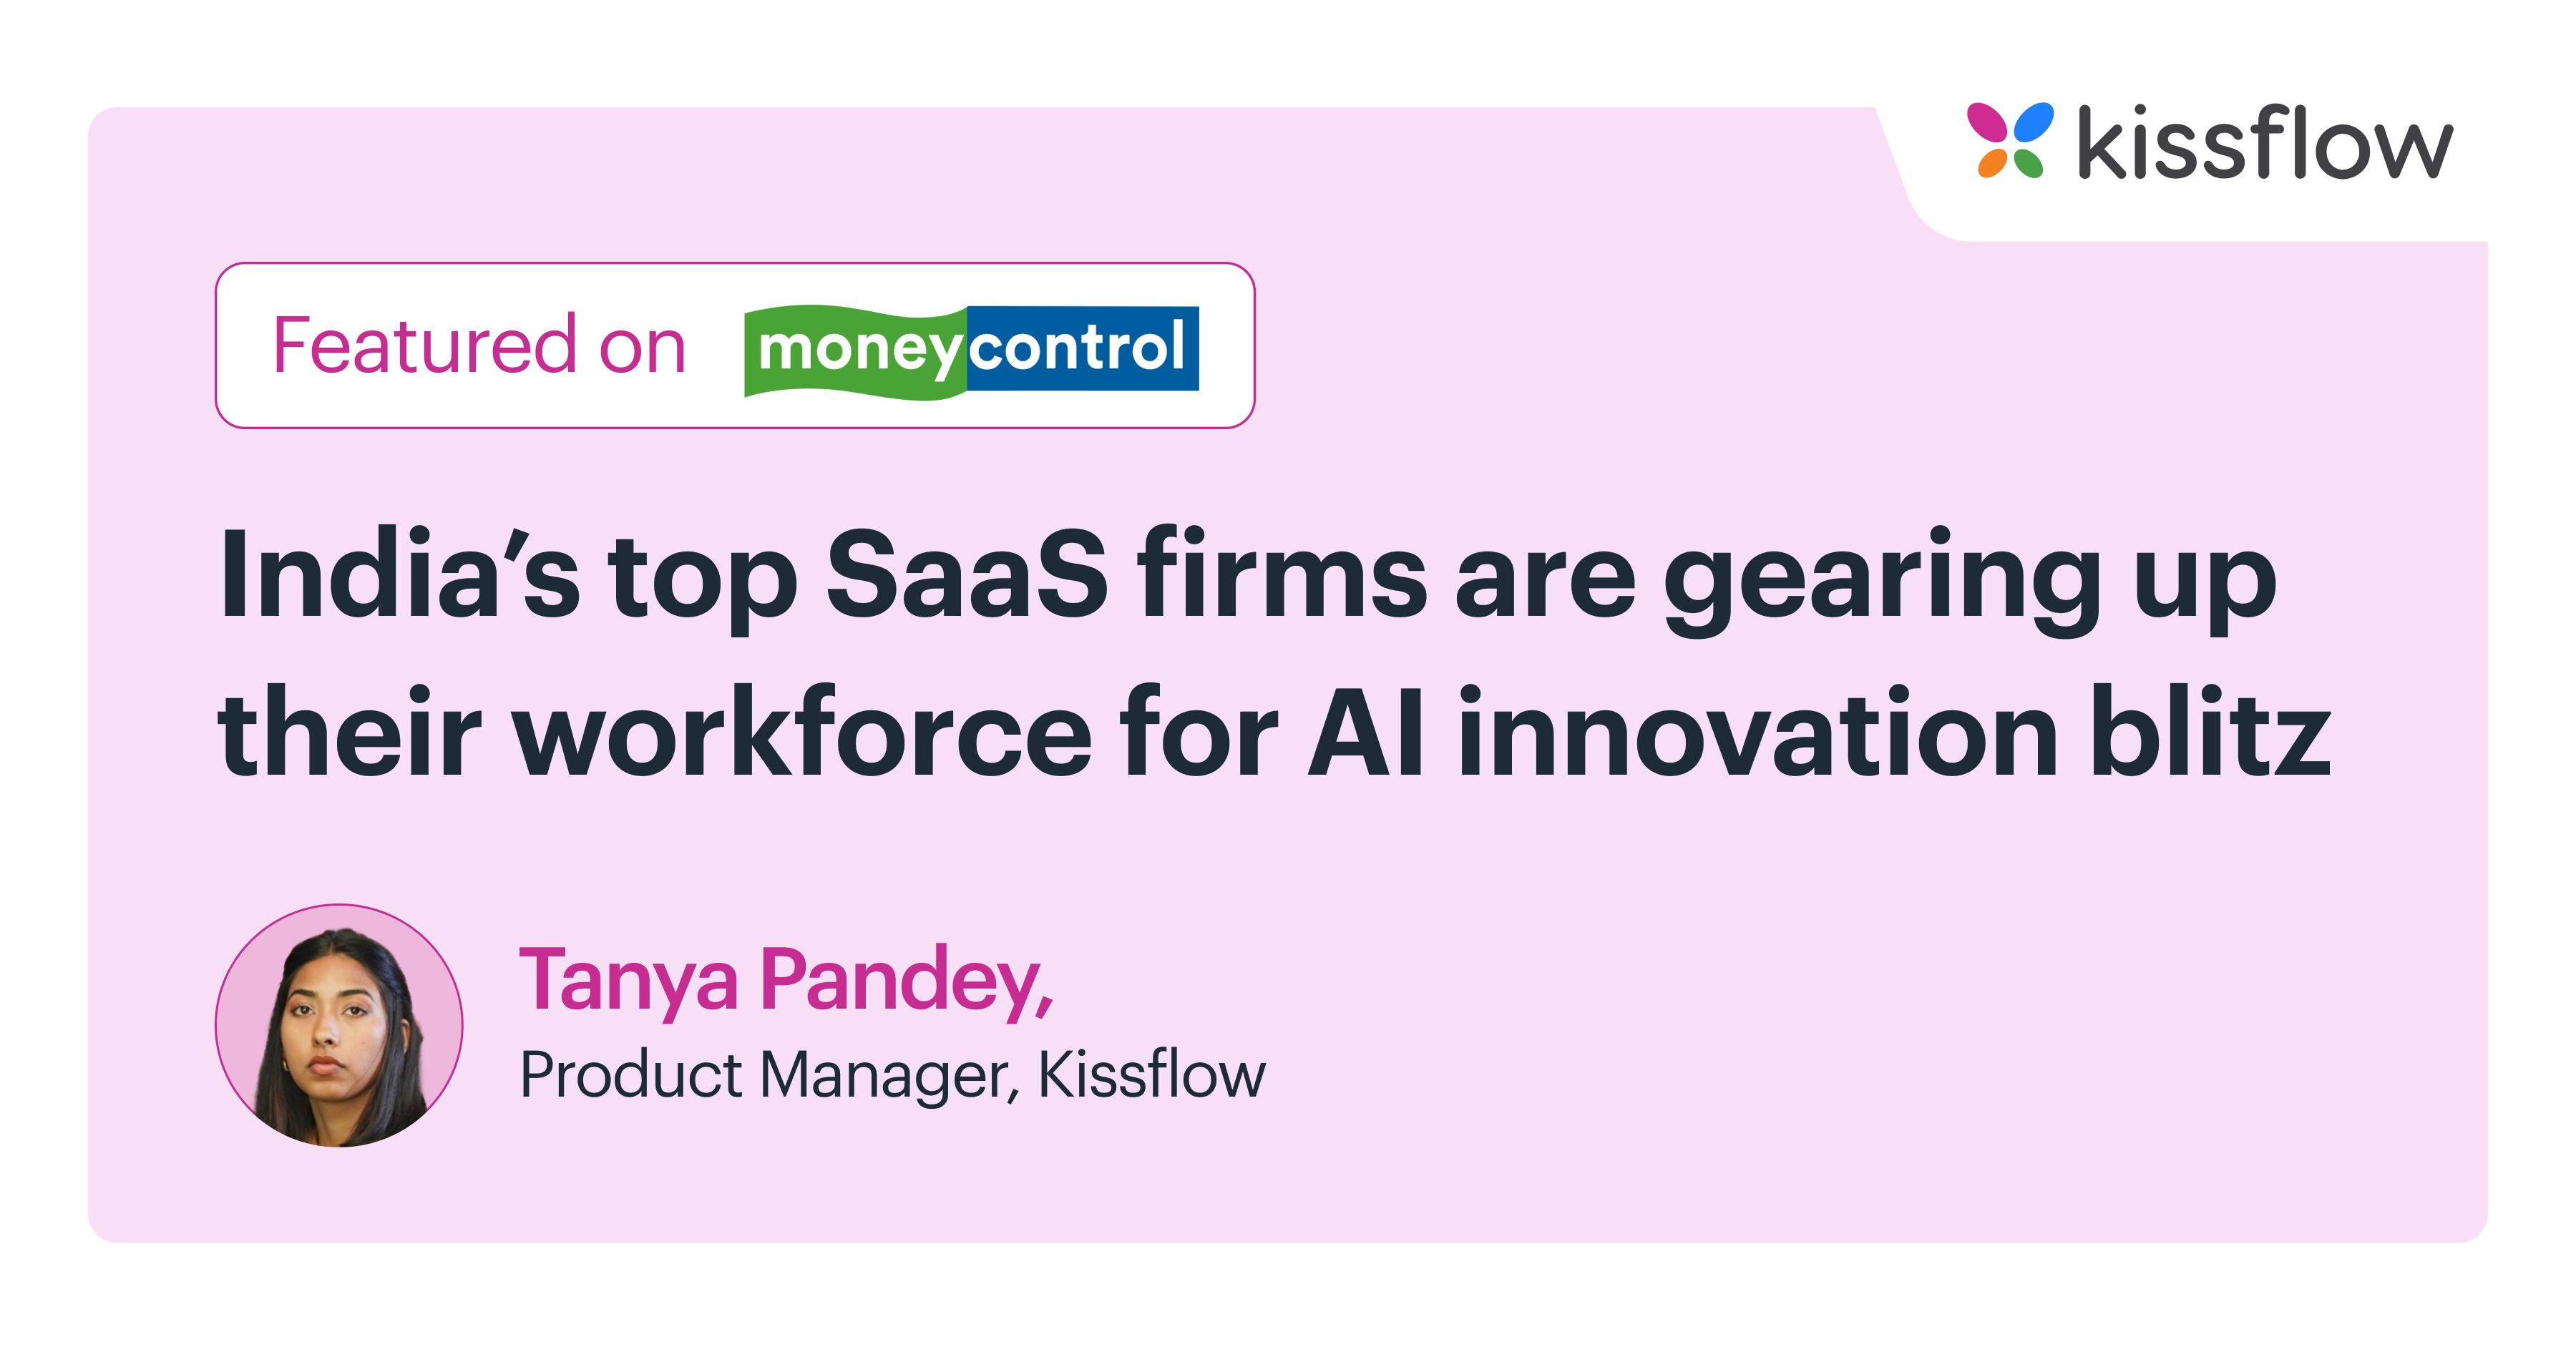 India’s top SaaS firms are gearing up their workforce for AI innovation blitz